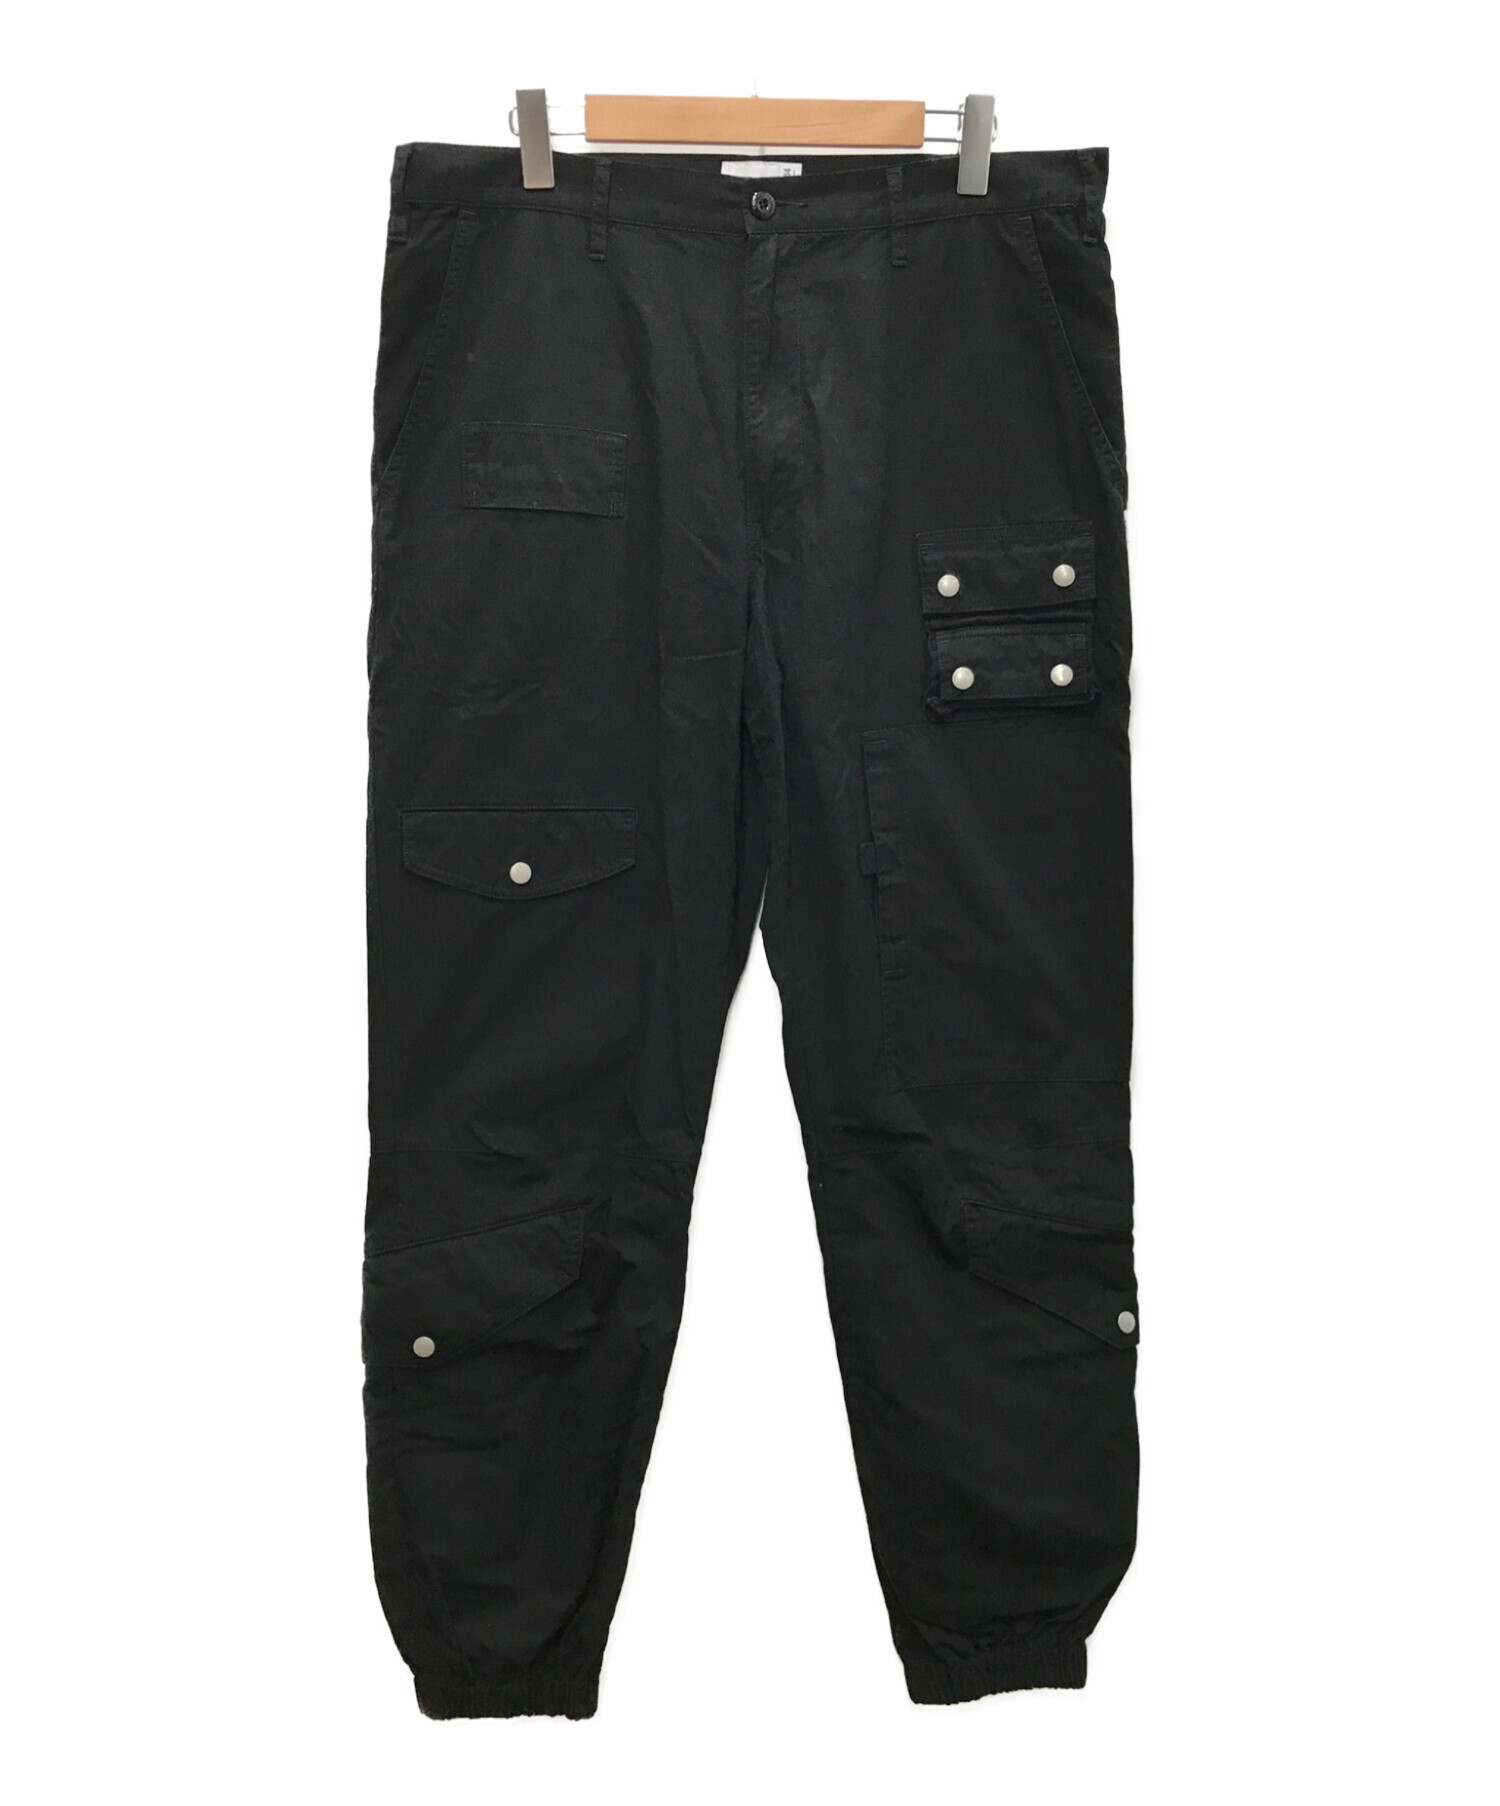 WTAPS MODULAR TROUSERS COTTON. RIPSTOP - ワークパンツ